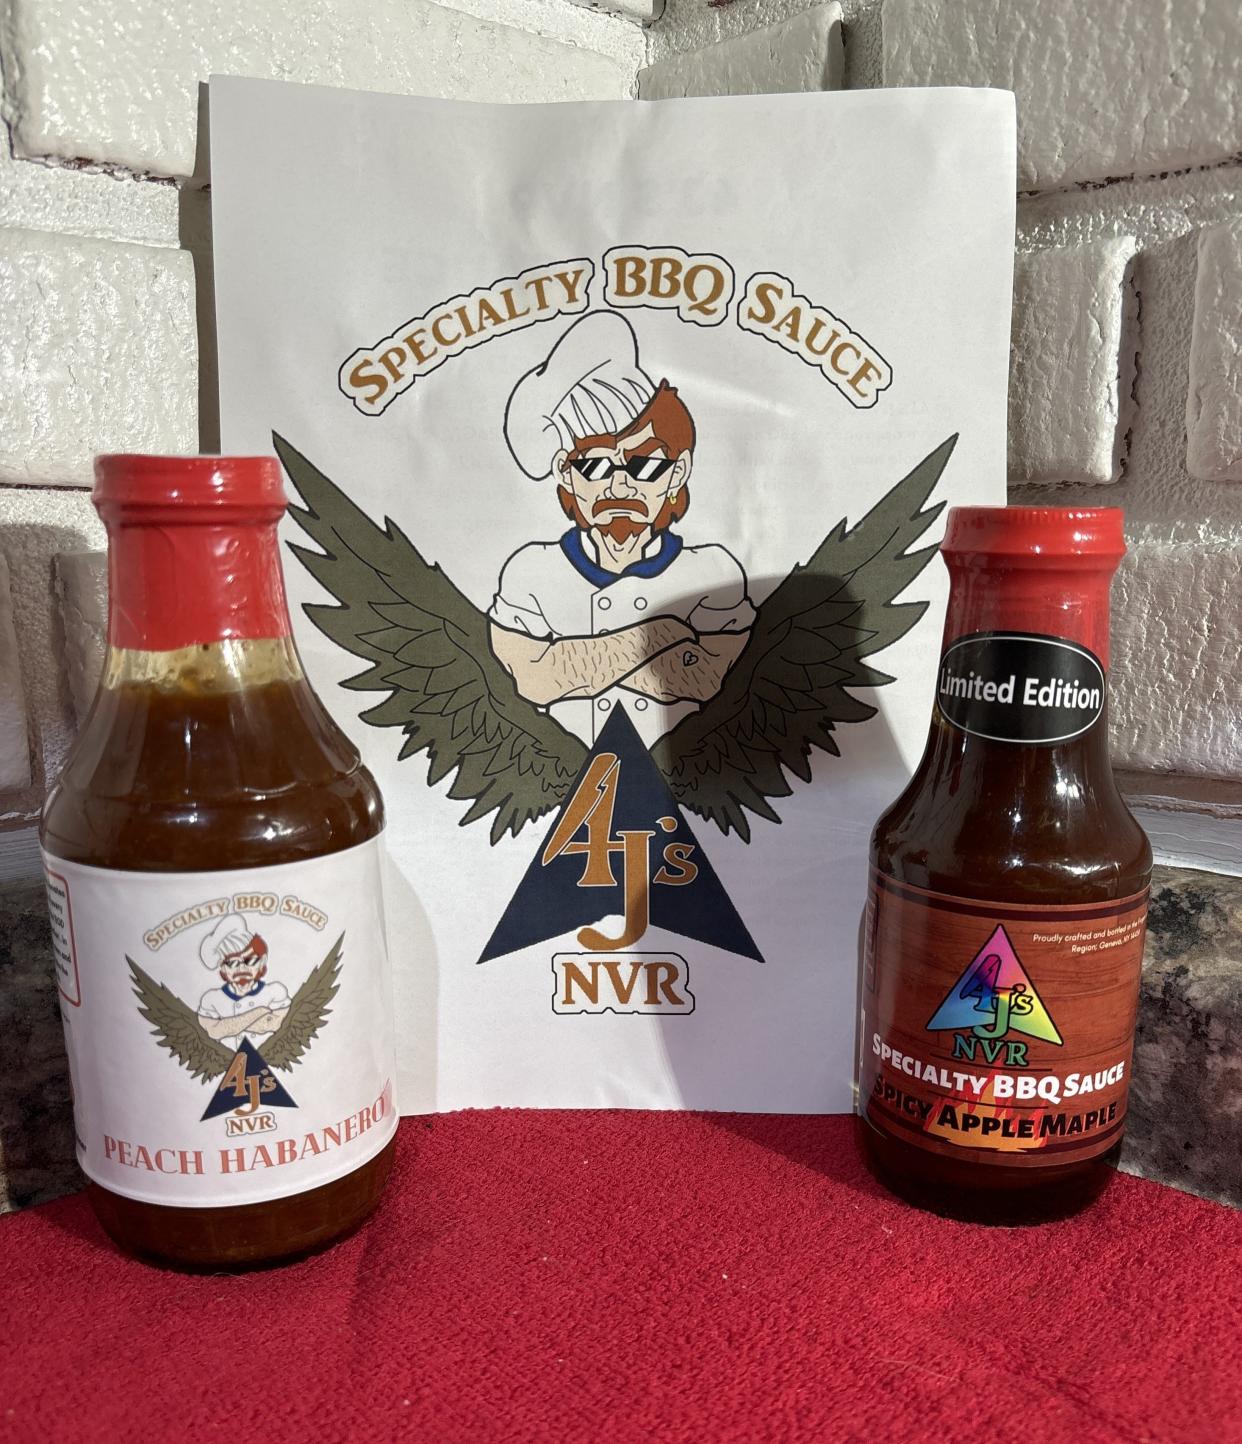 Peach habanero and spicy apple maple are gluten-free barbecue sauces, as are other of 4J’s NVR Specialty BBQ Sauce products. Fruit, not vinegar, are their keys to flavor.